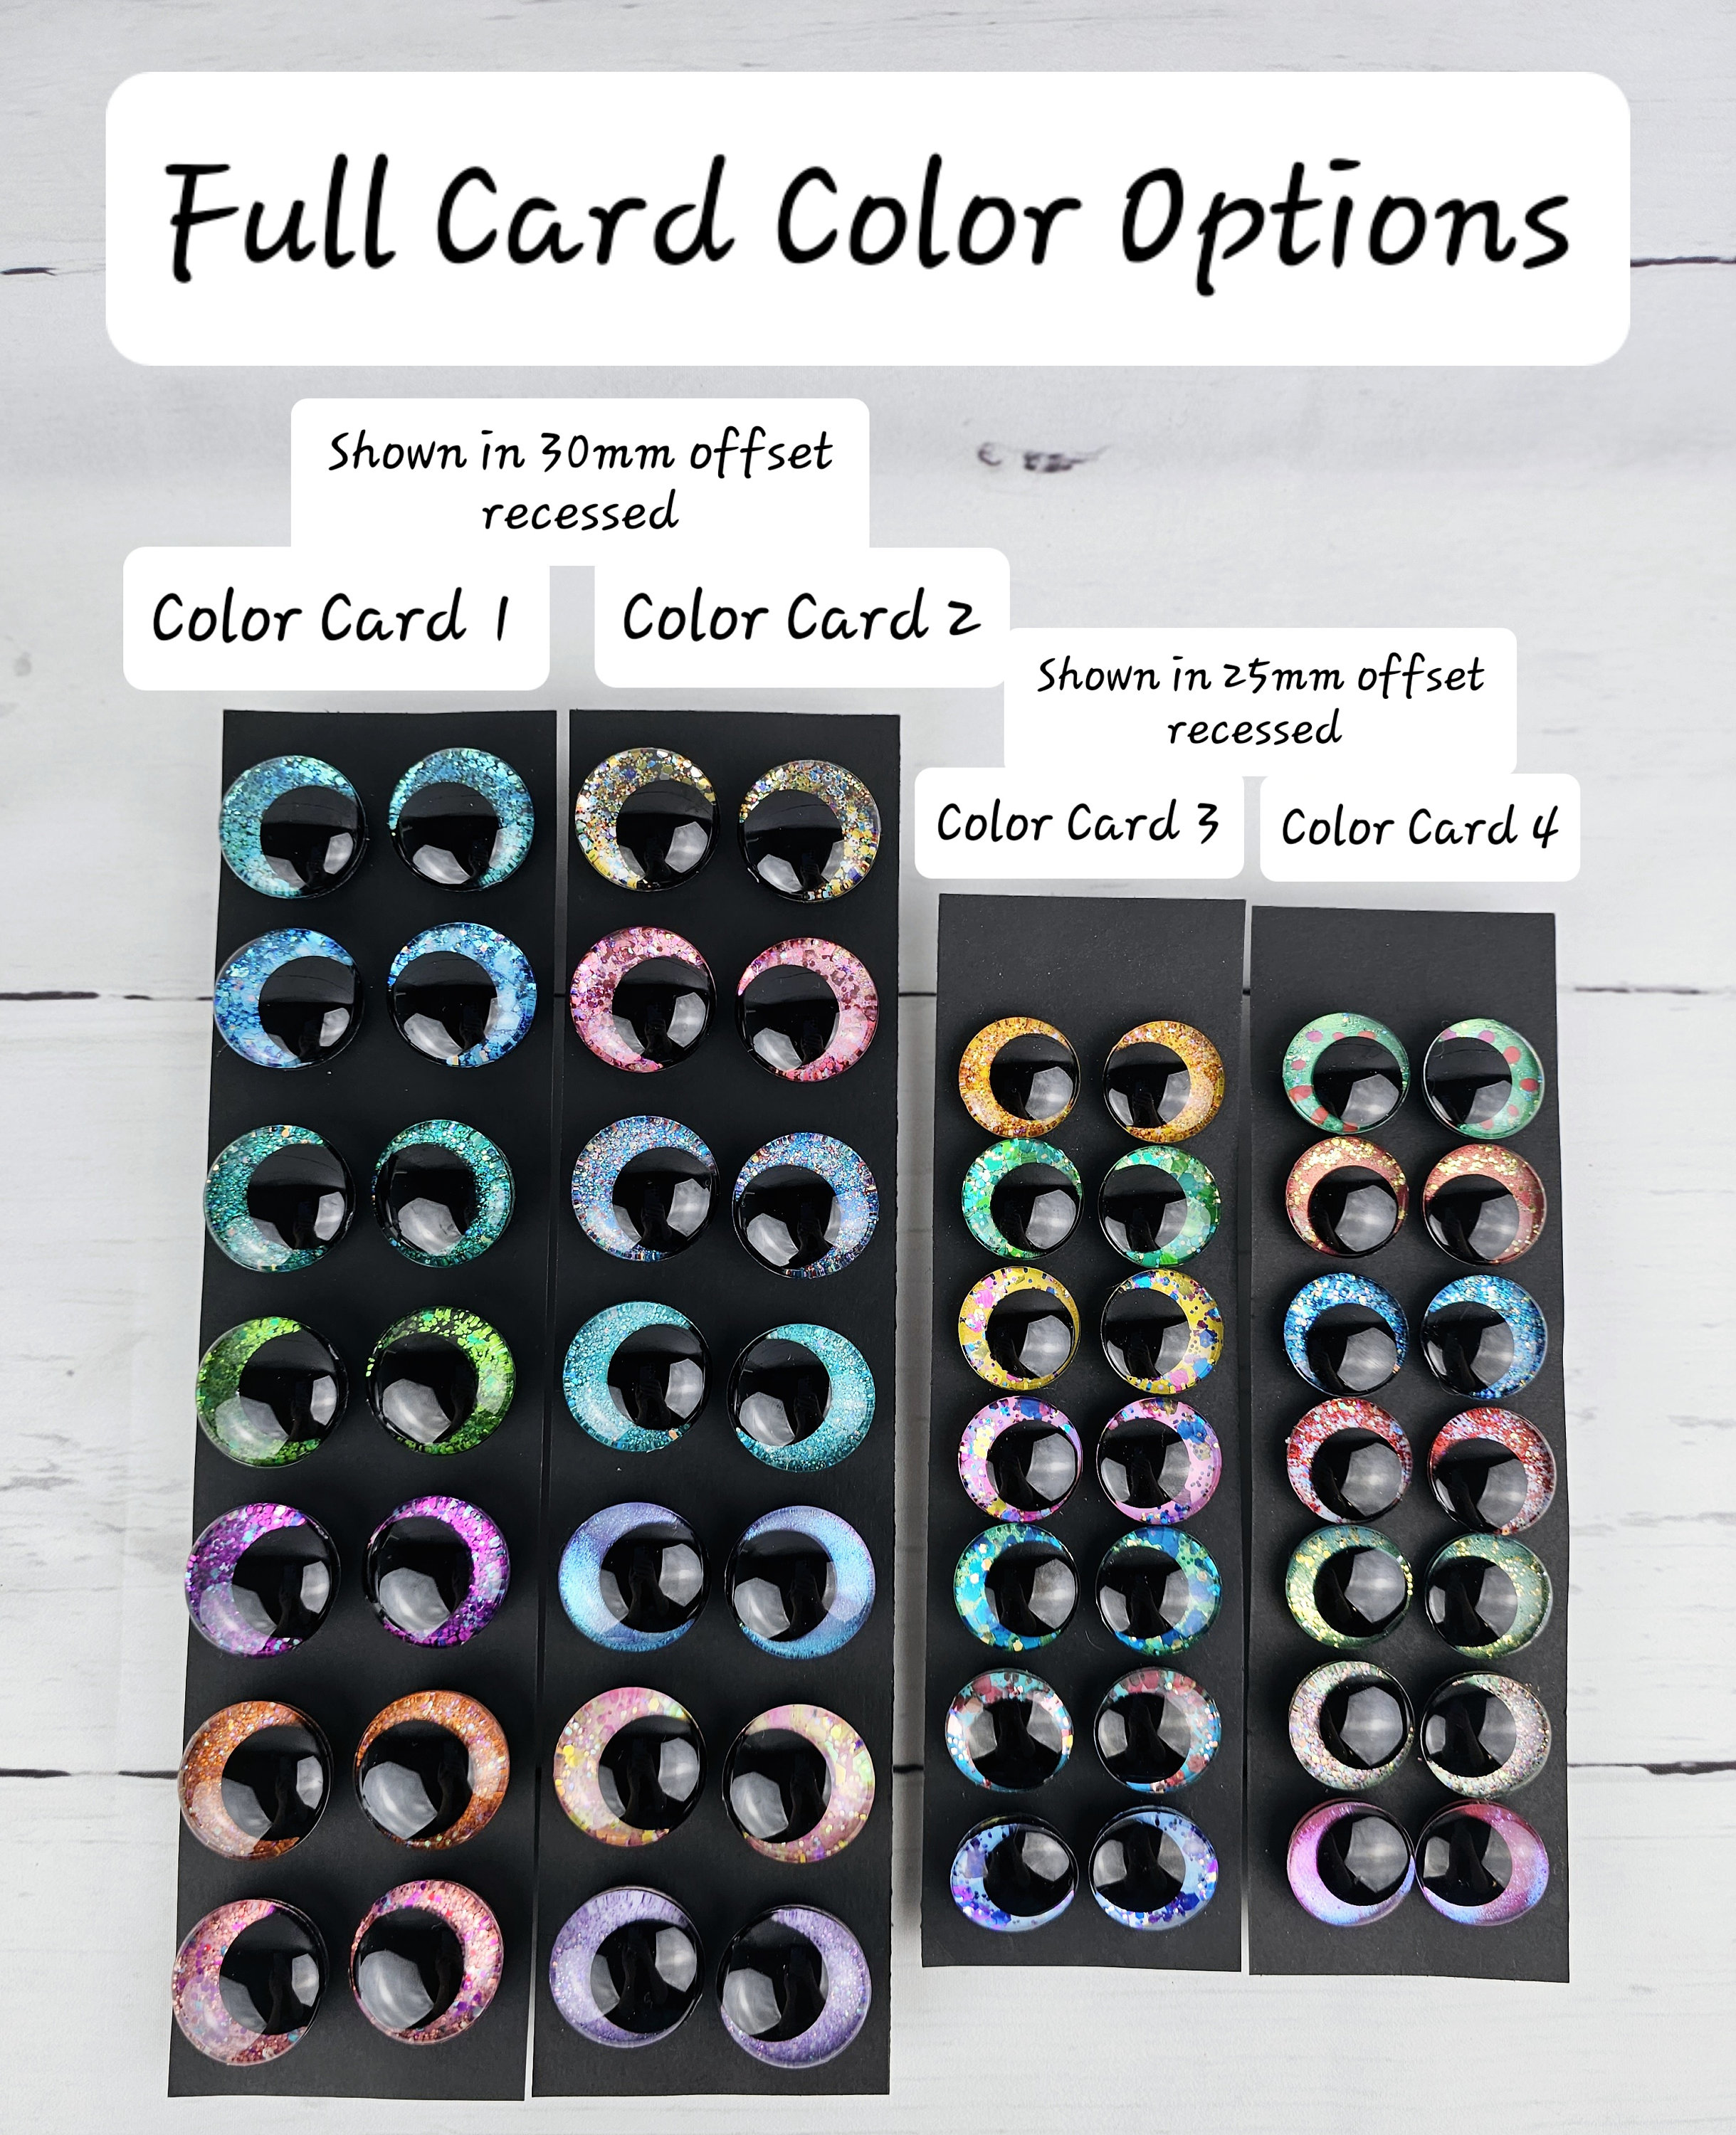 ITS PREORDER DAY! Which color is your favorite? Safety eyes will